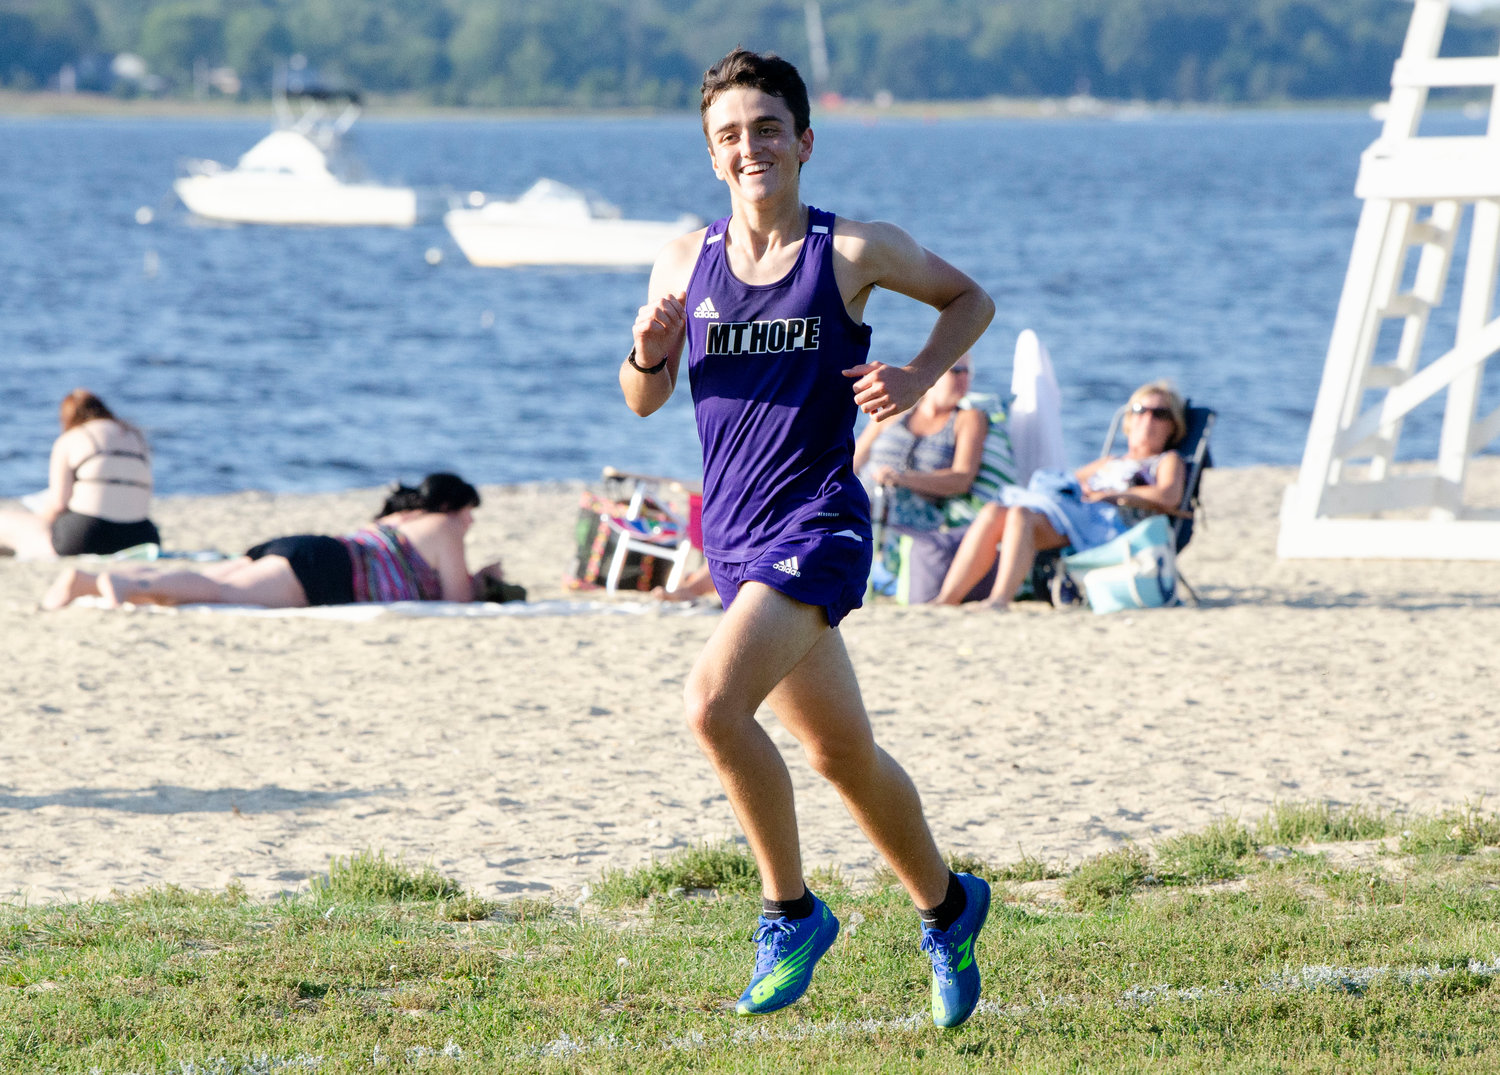 Mt. Hope senior Sam Merriam crosses the beach towards the finish line leading the 25 man field. he placed first with a time of 18:40.